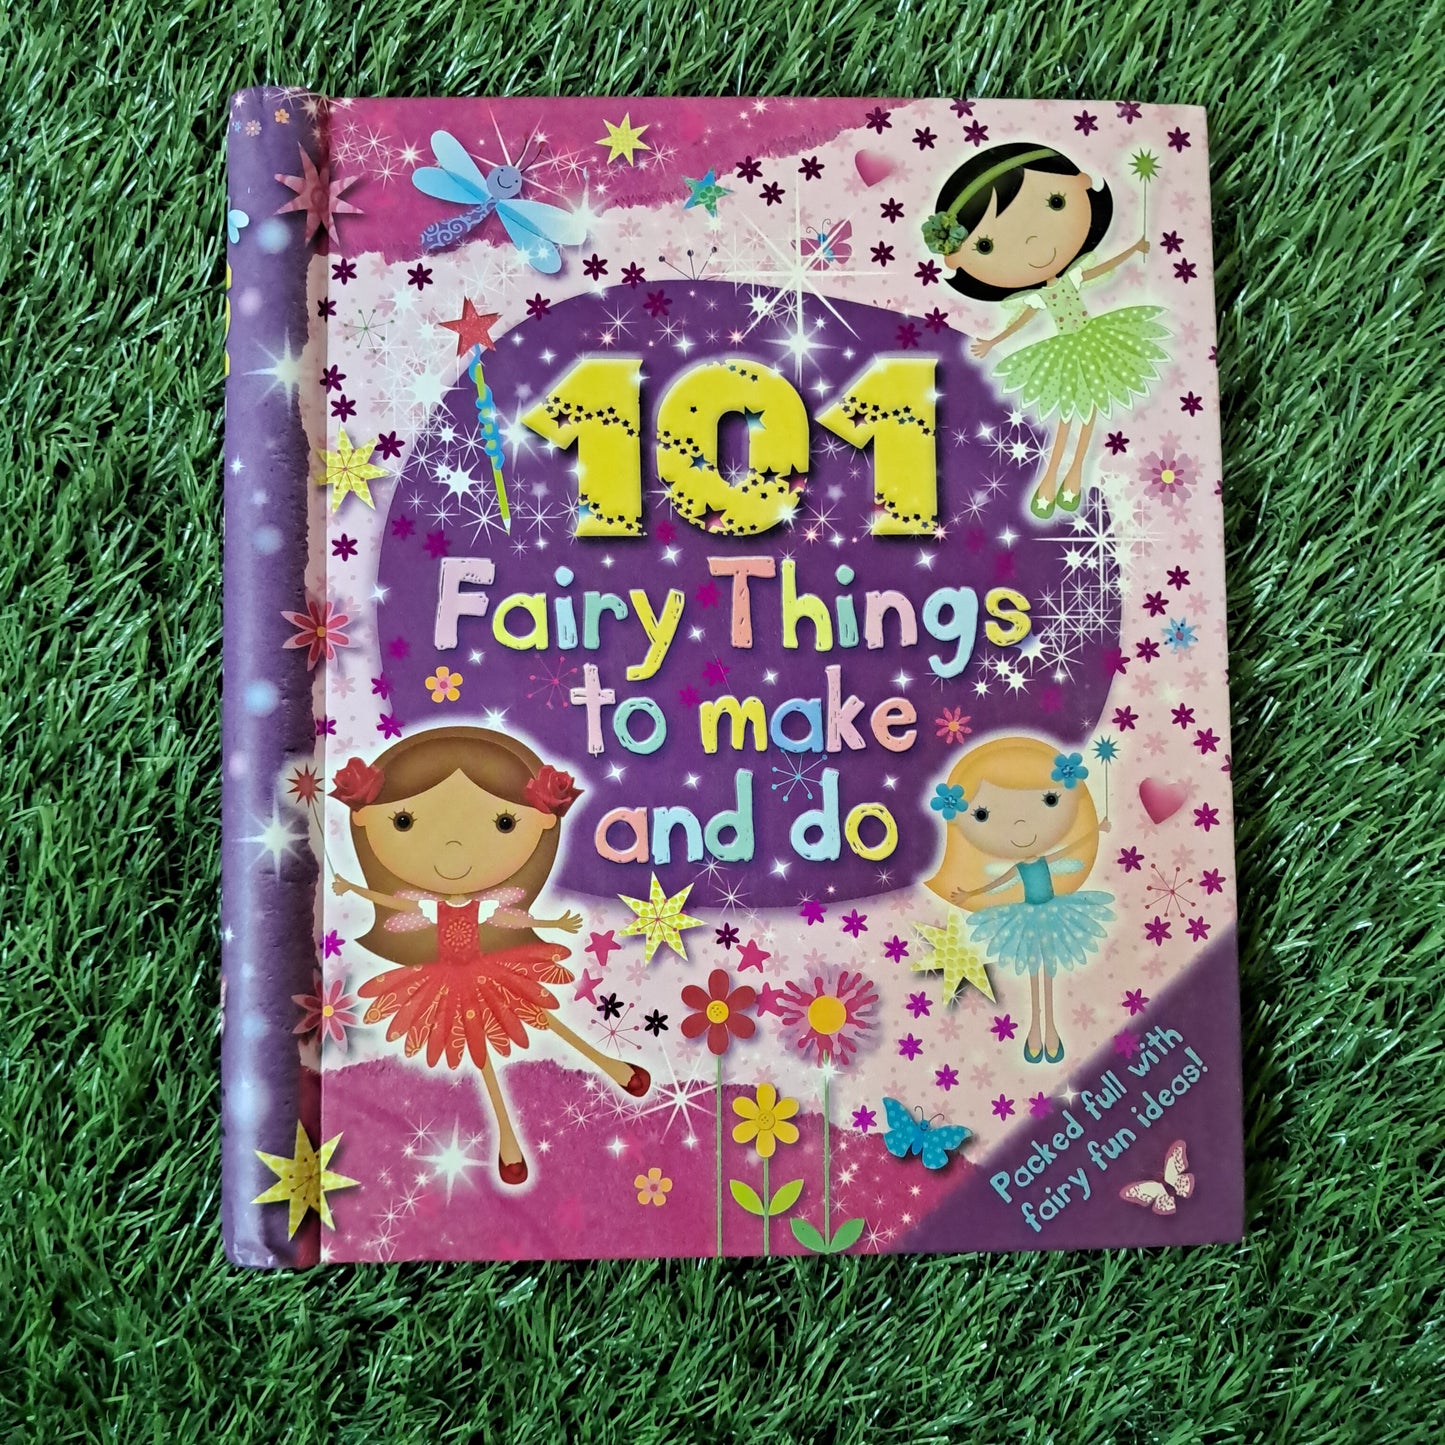 101 Fairy Things to Make and do